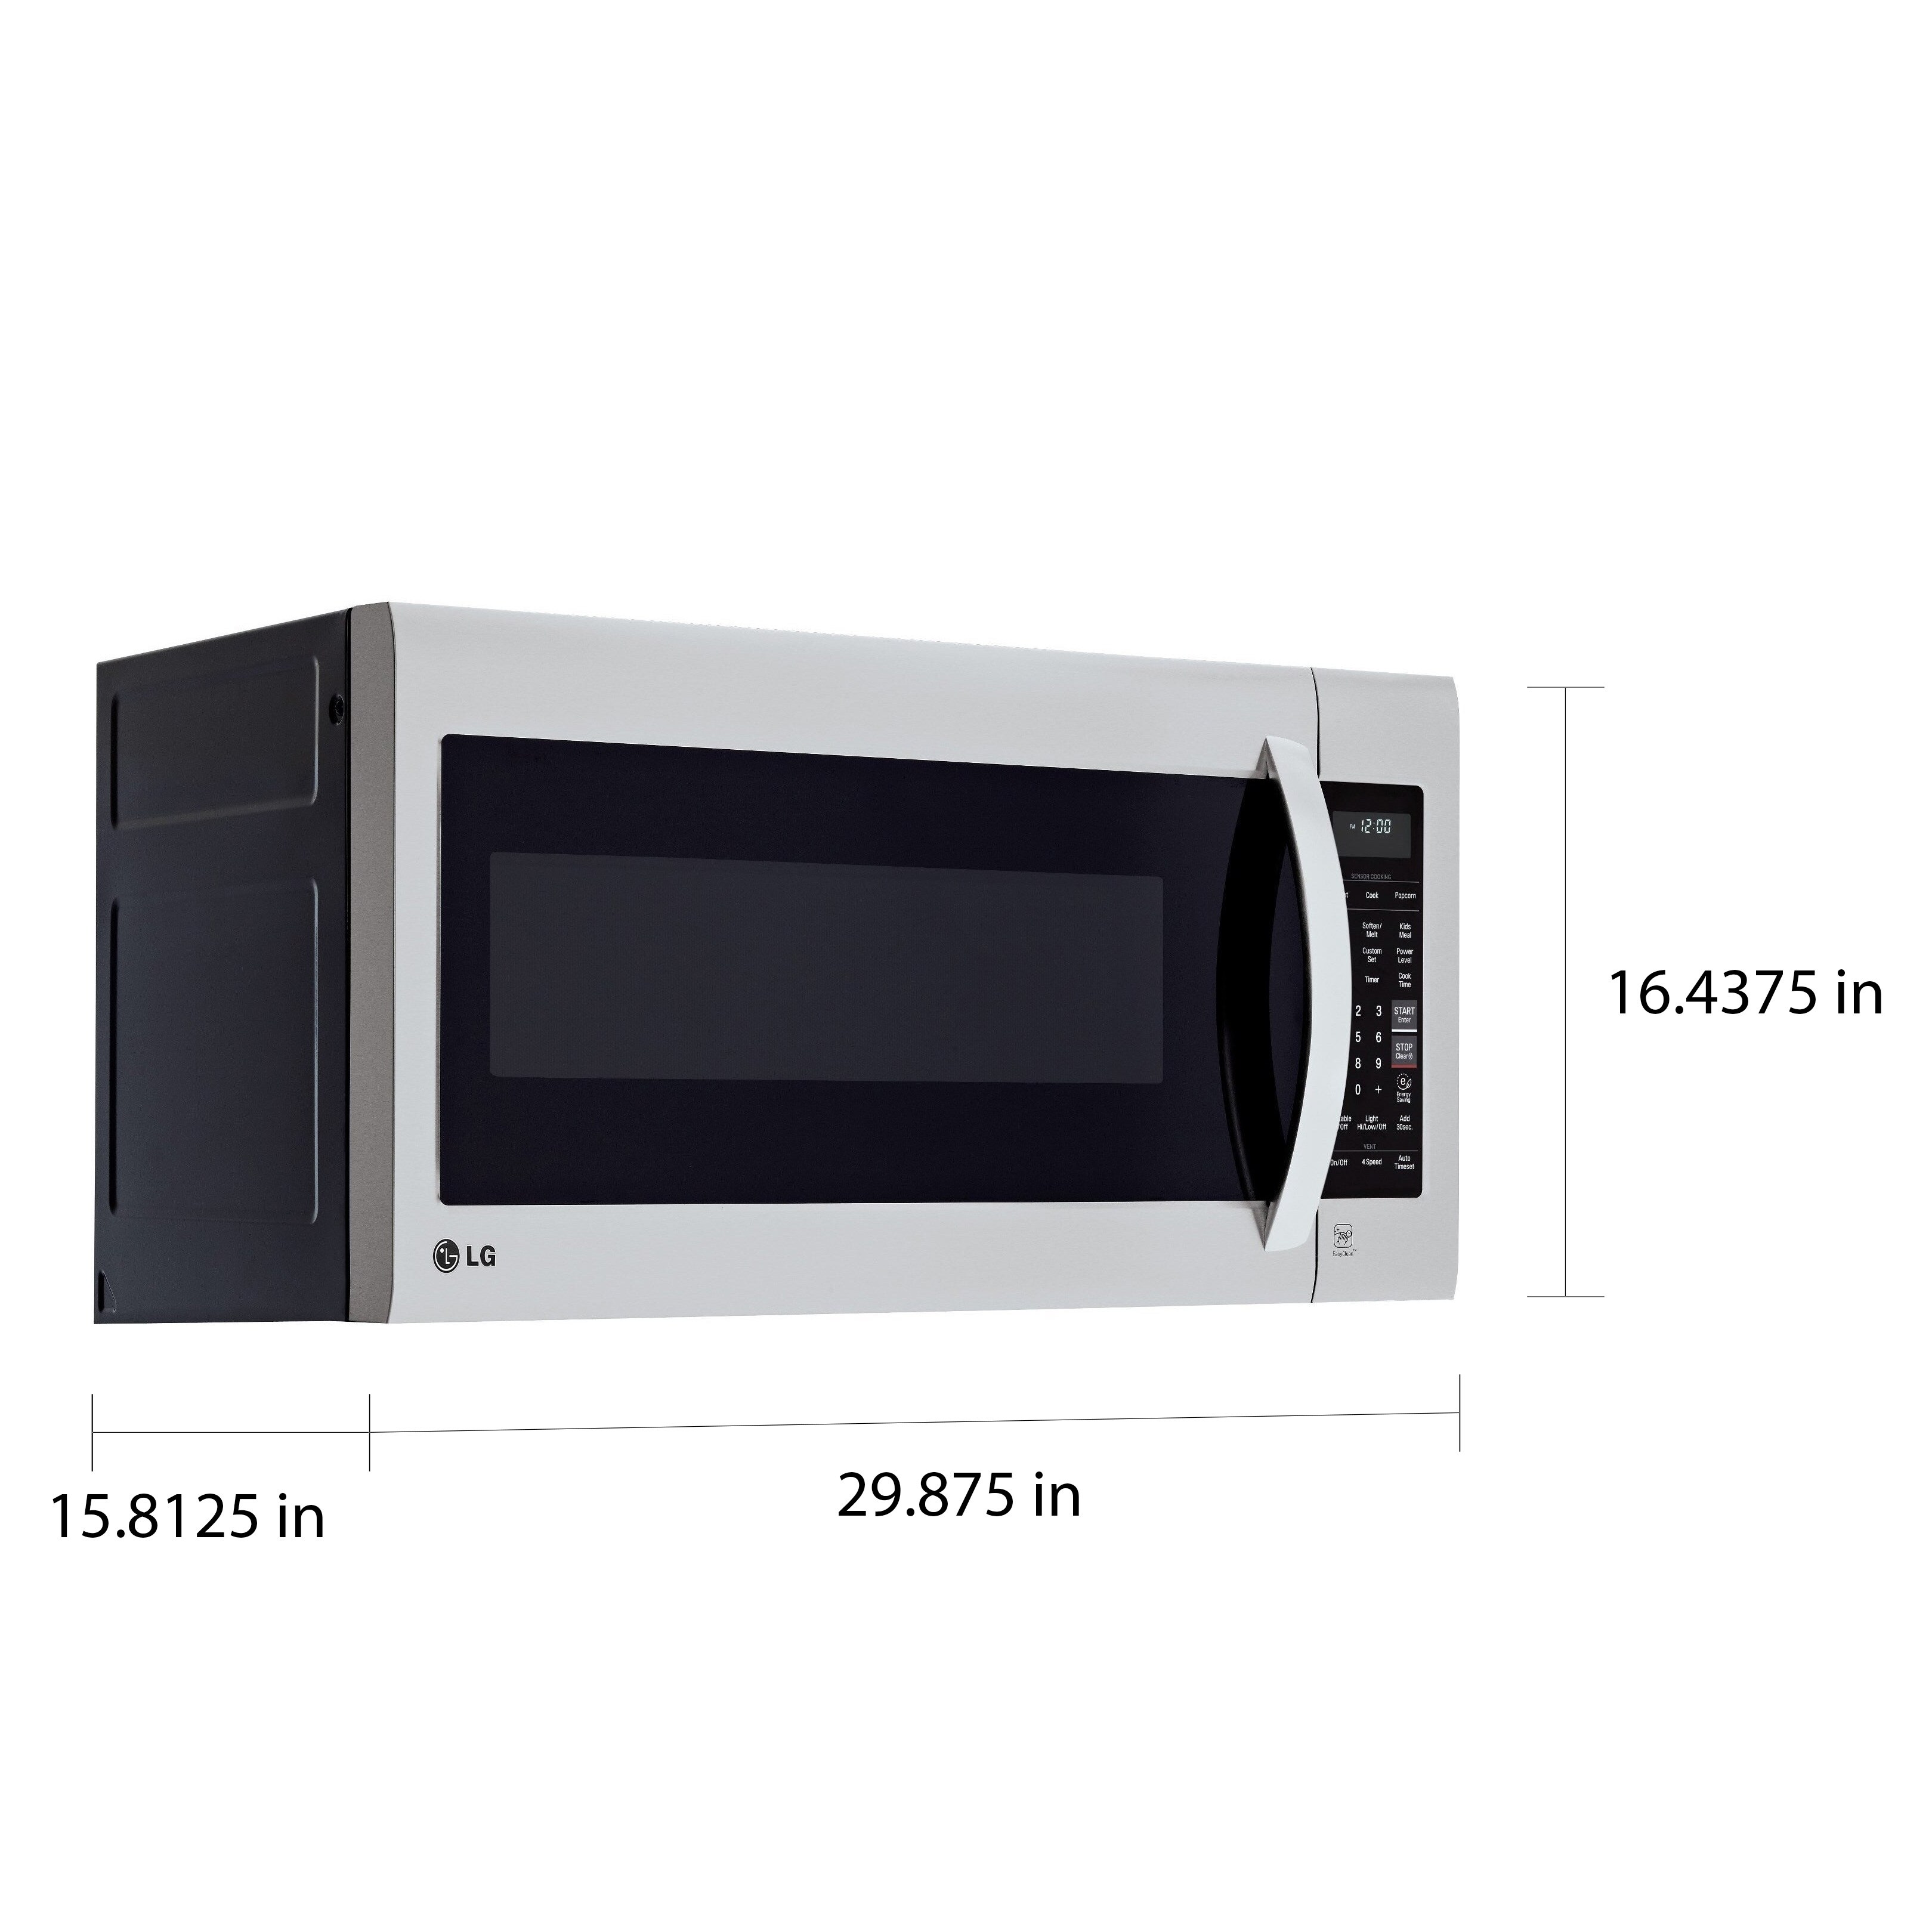 LMV2031ST - Microwave oven - built-in - 2 cu. ft - 1000 W - stainless steel with built-in exhaust system - image 2 of 2